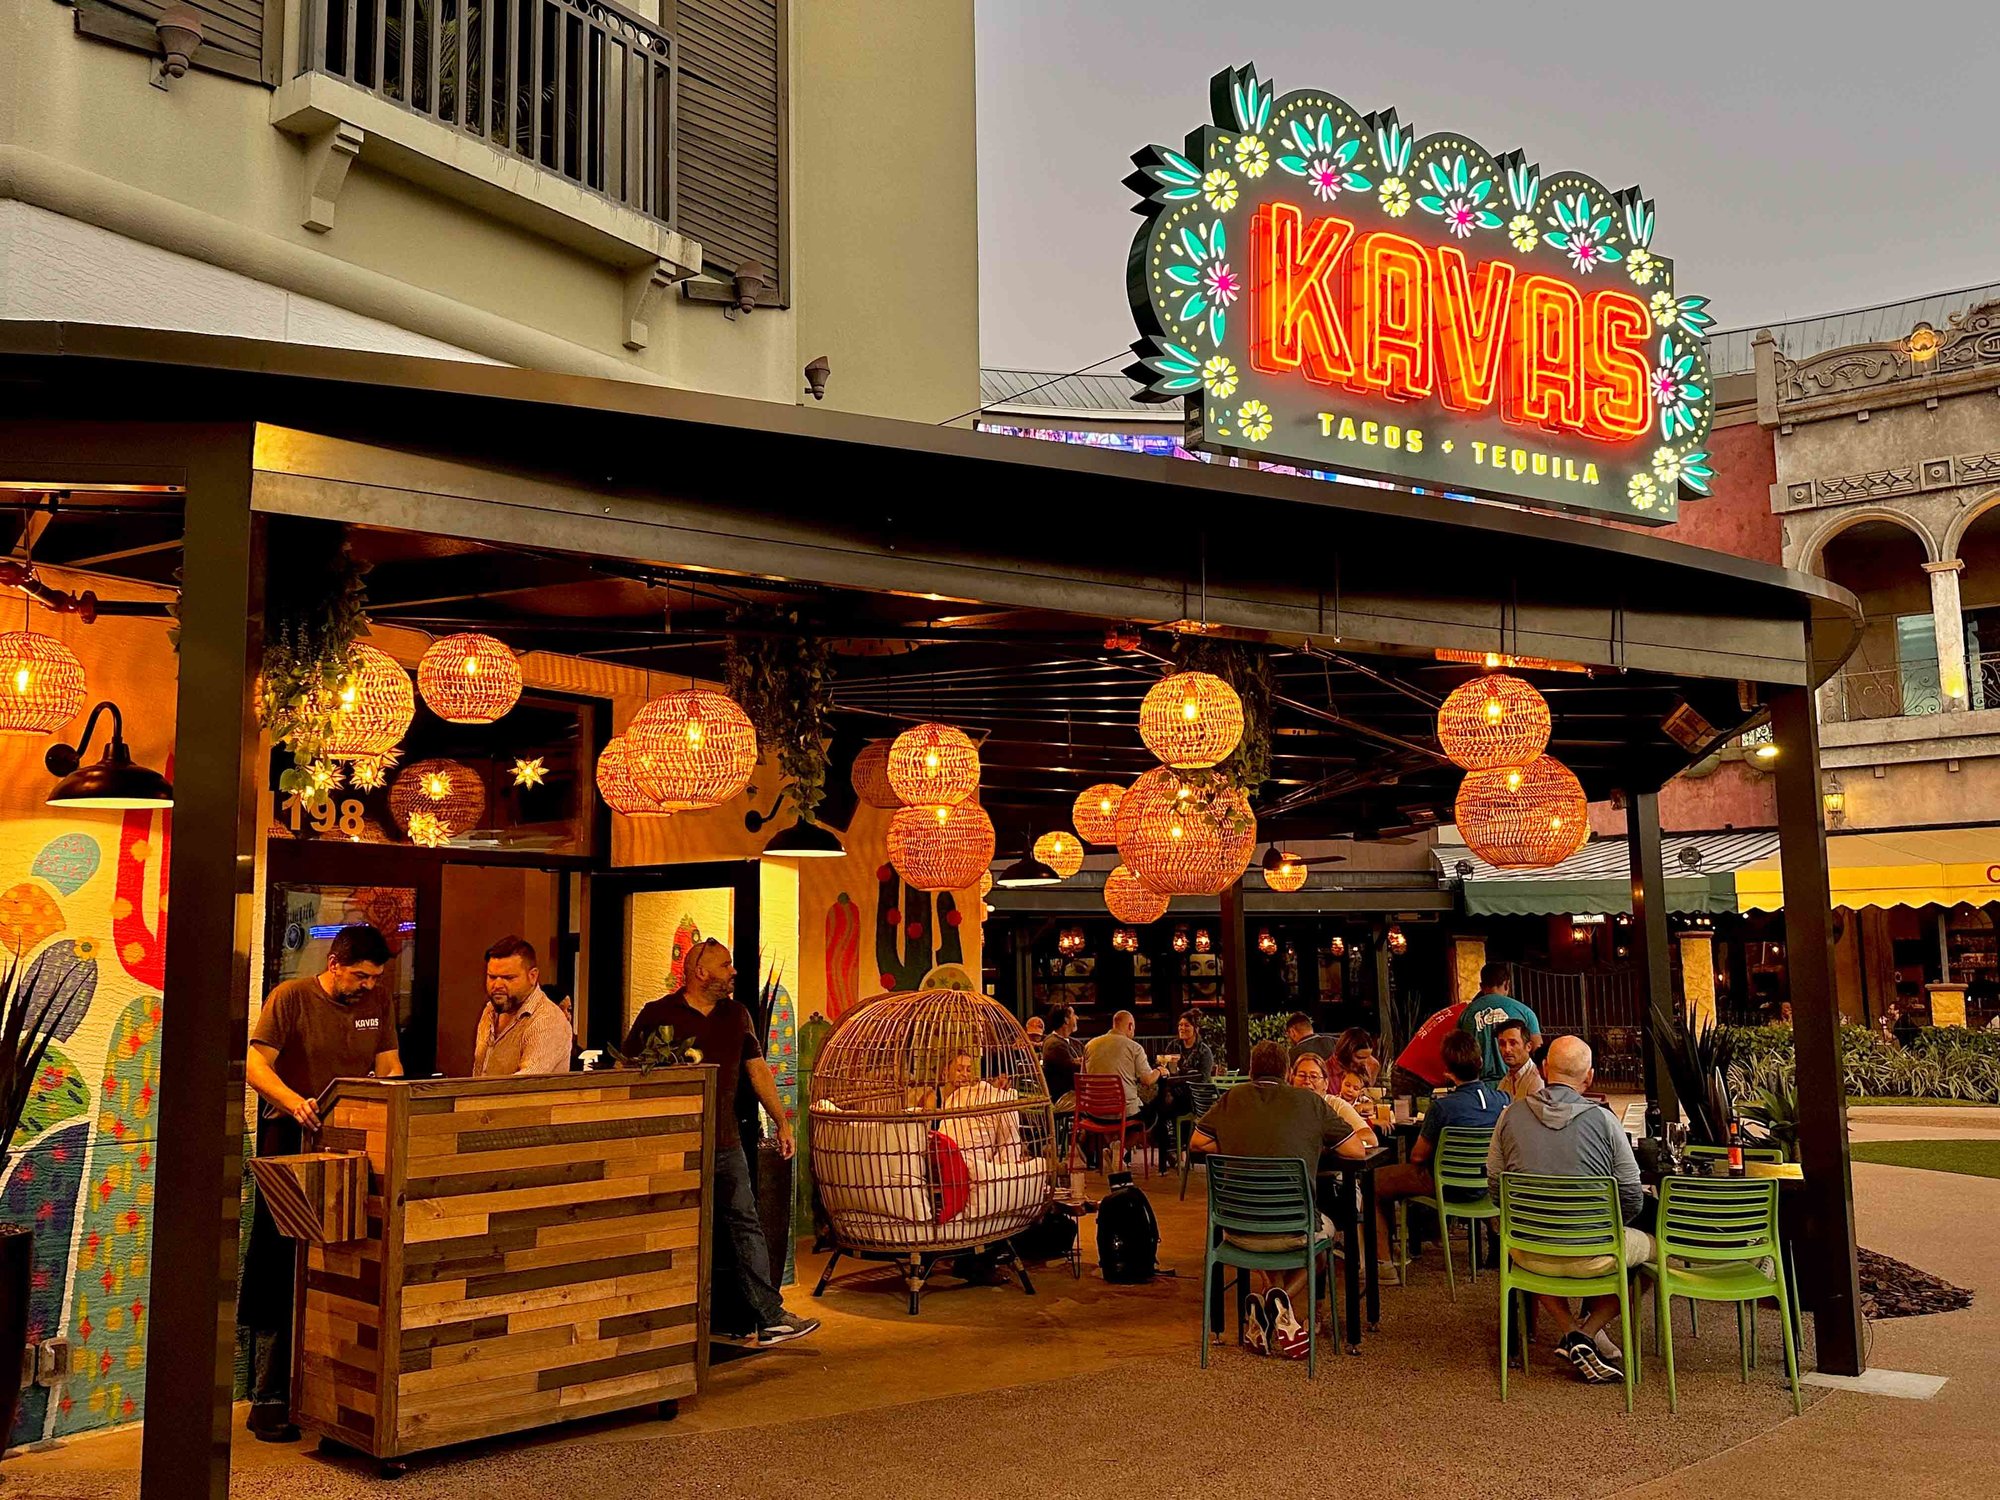 kavas outdoor seating with hanging lights under an awning